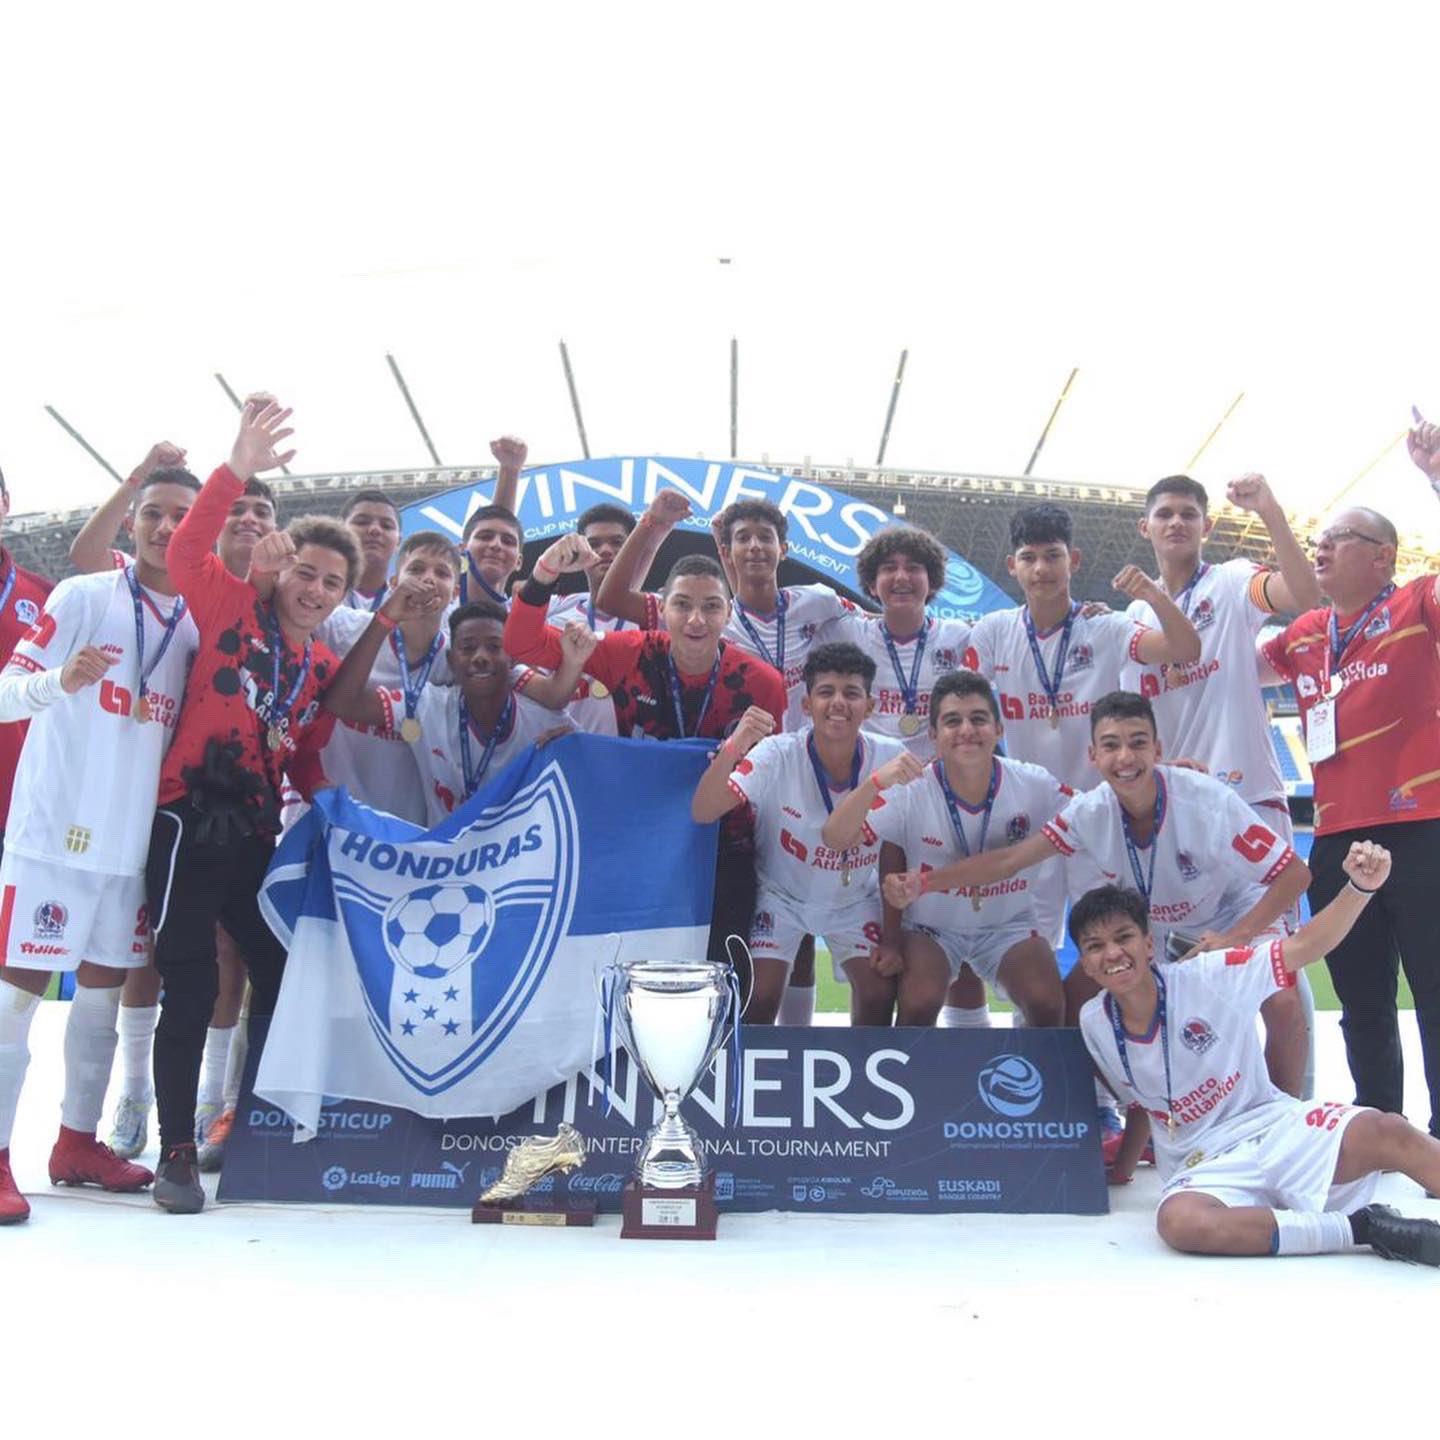 Olympia won the U15 Champion title at the Donosti Cup held in Spain